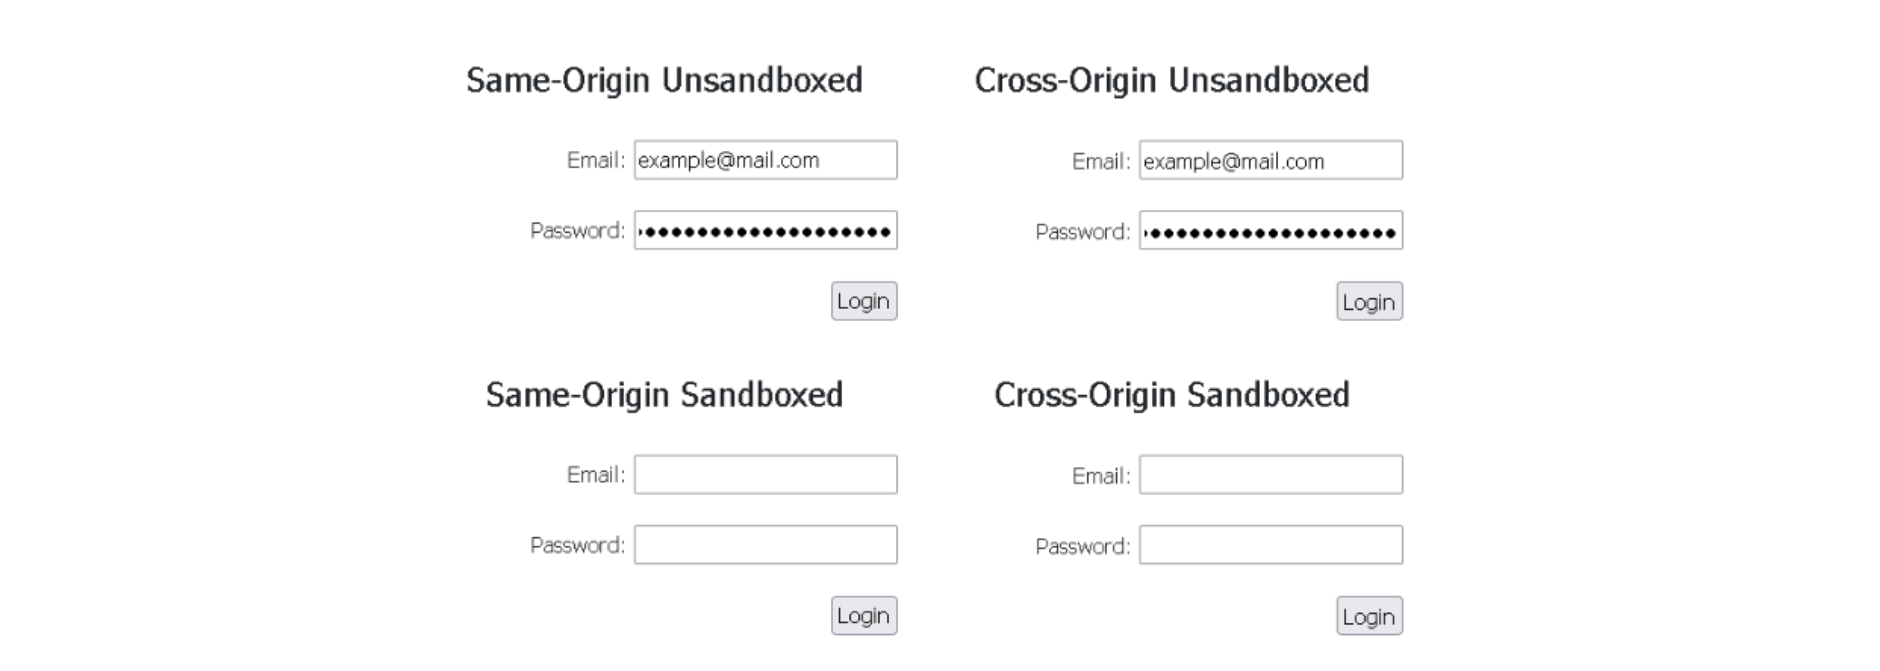 Bitwarden-extension-filling-same-origin-and-cross-origin-iFrames-if-the-user-consents